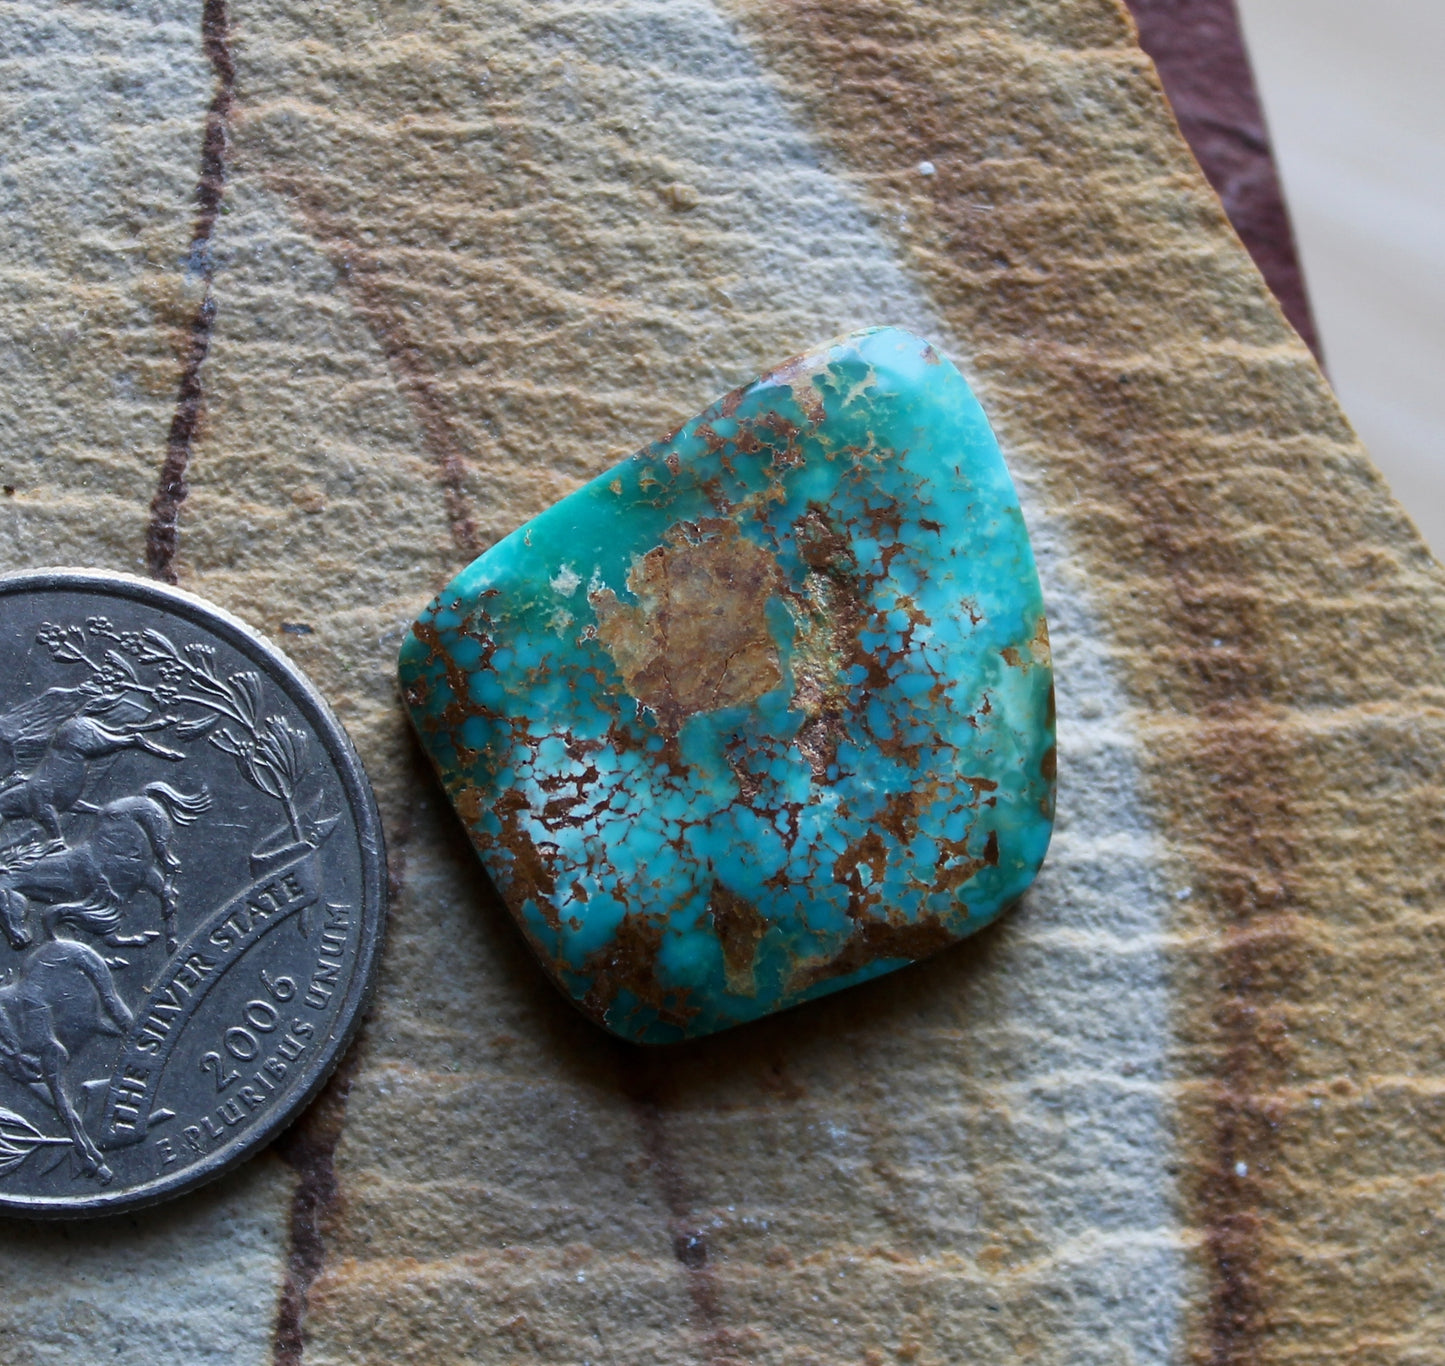 22 carat blue Stone Mountain Turquoise cabochon with red spiderweb matrix